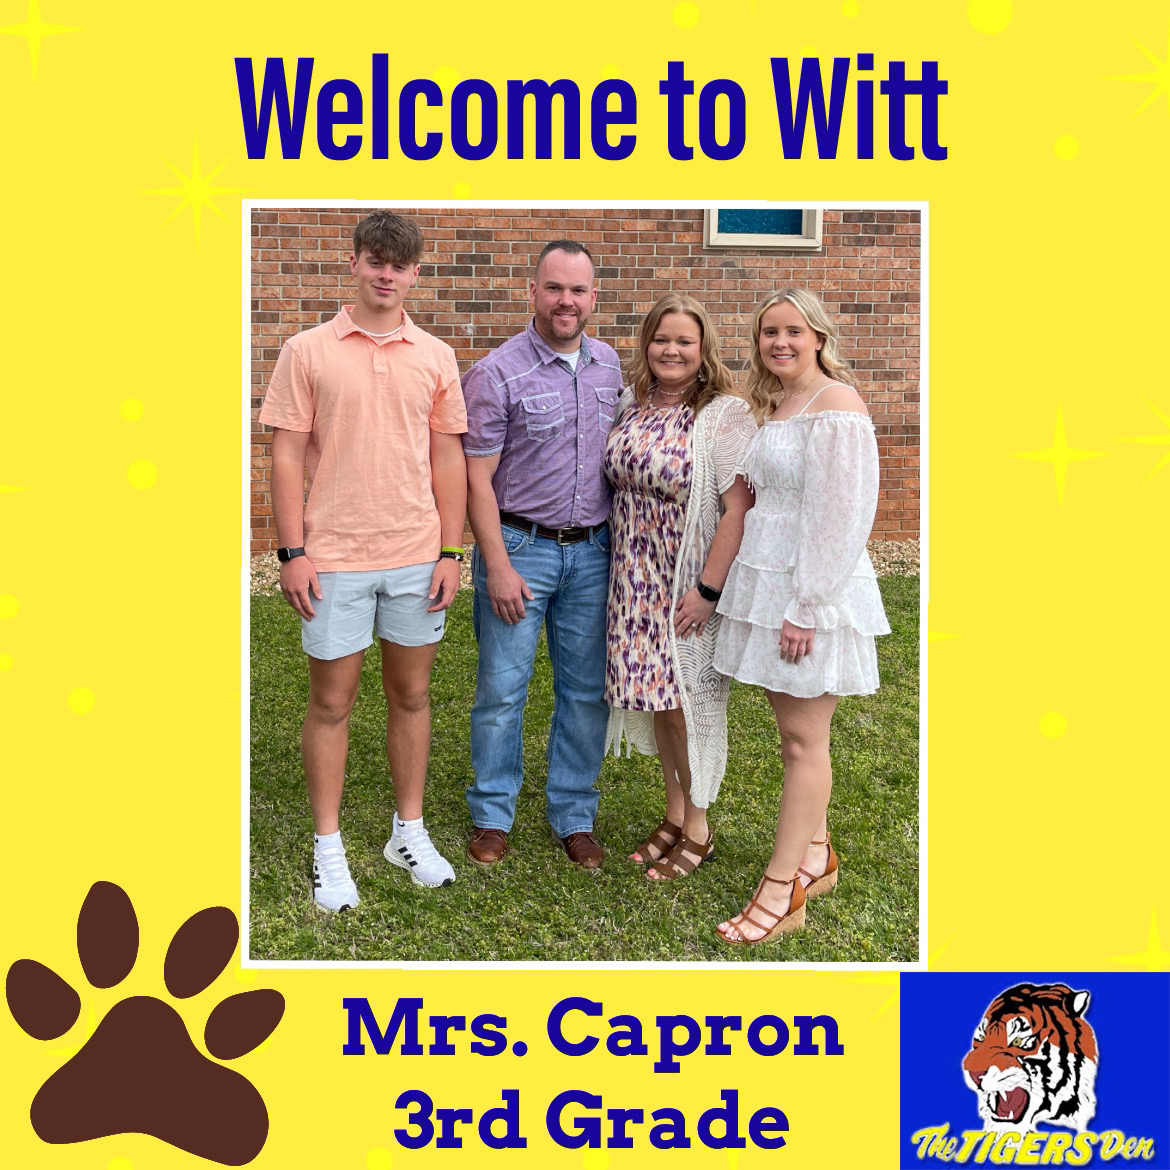 Welcome Mrs. Capron! 